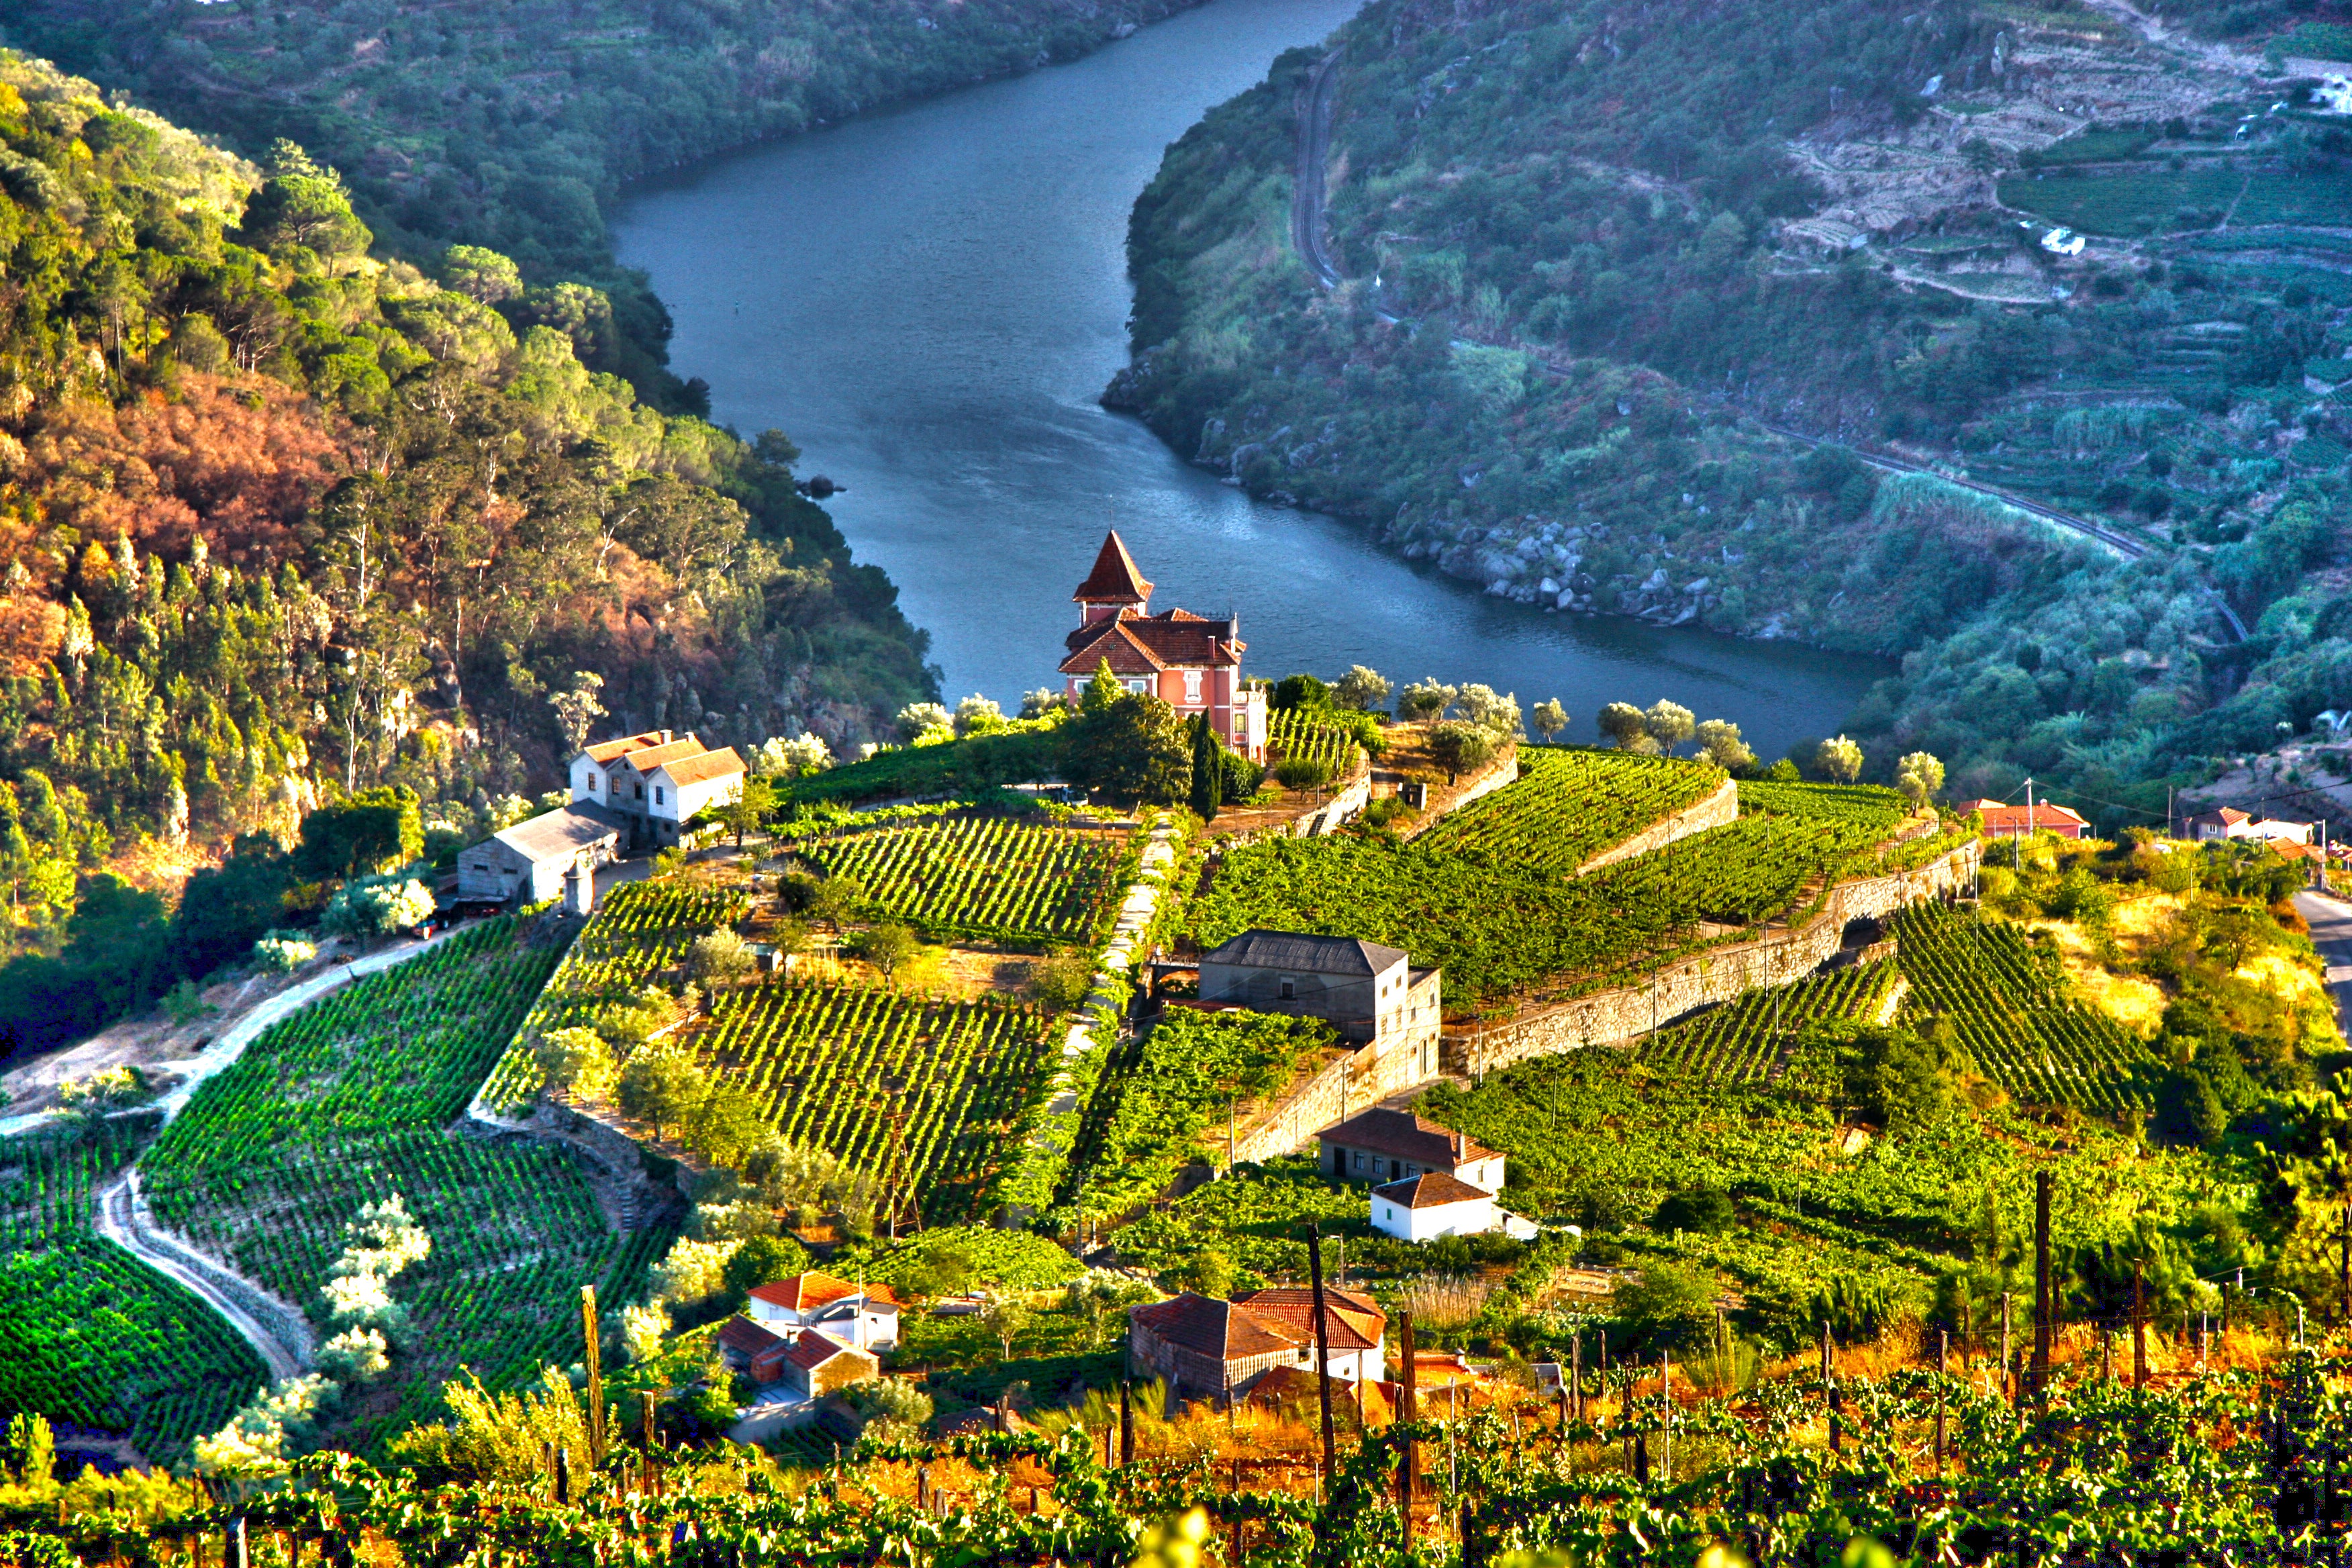 The Douro Valley has been a listed World Heritage Site since 2001